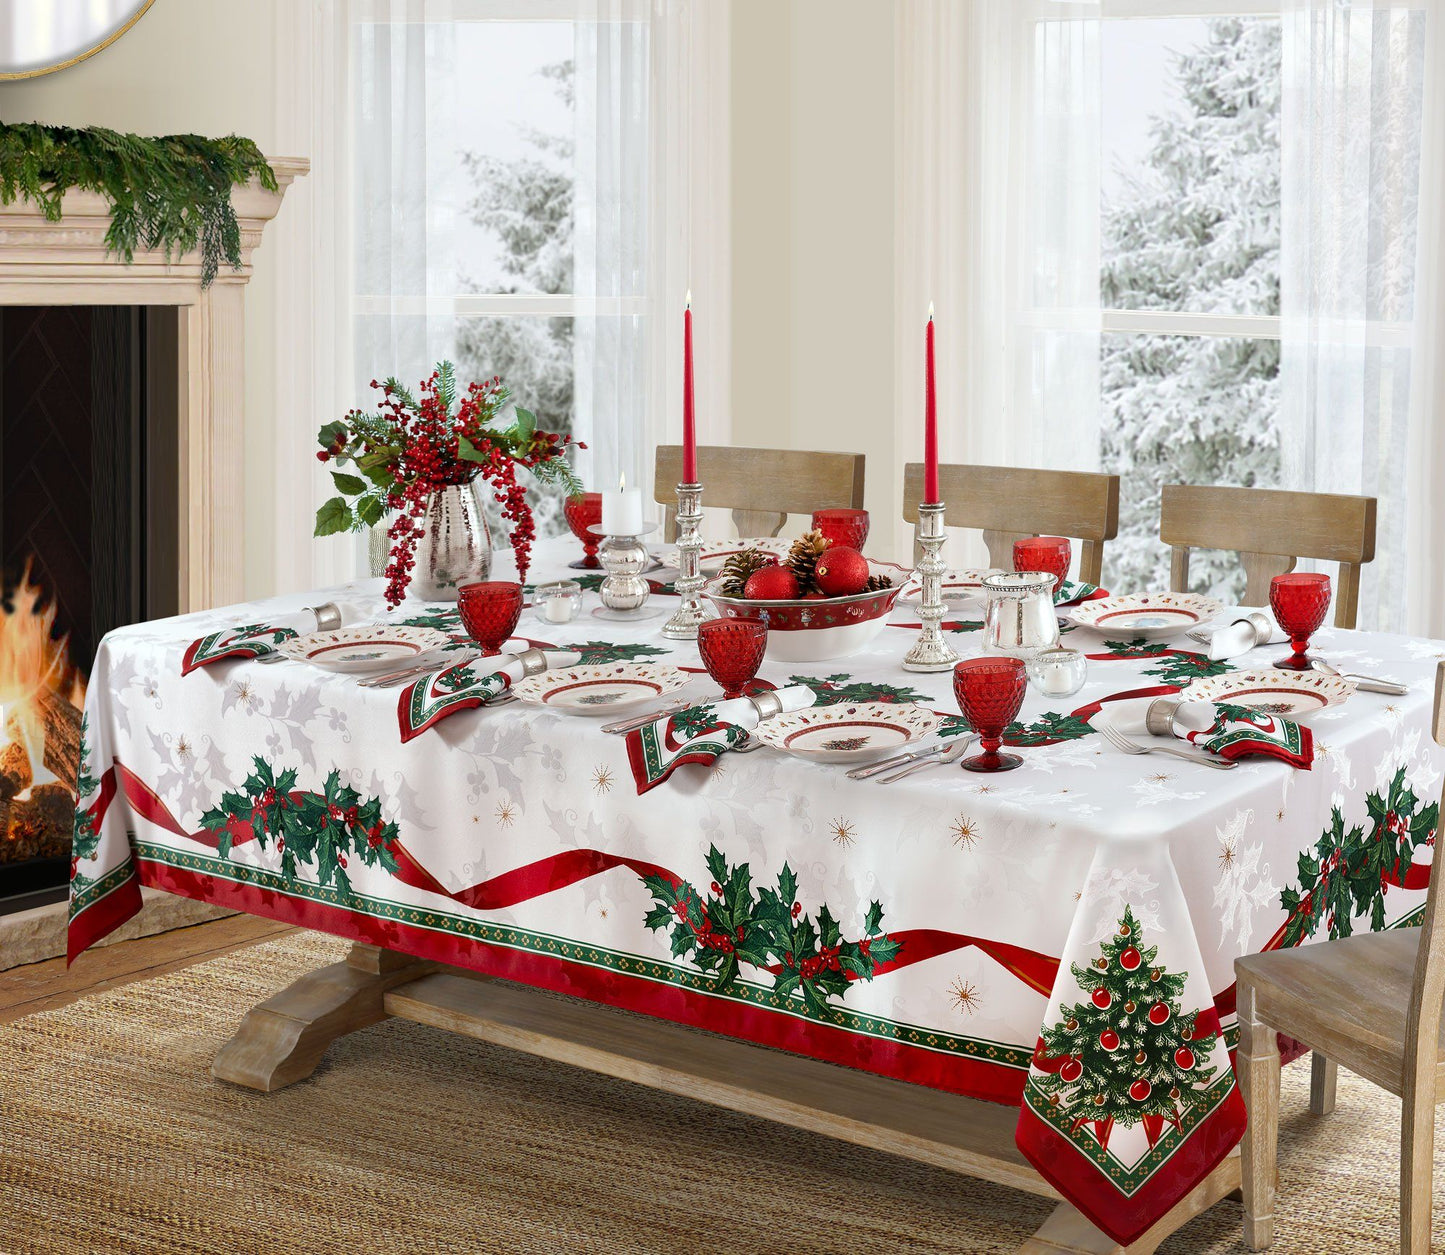 White holiday tablecloth with holly damask designs all over, red ribbon design border and red and green holly and Christmas trees along the ribbon border